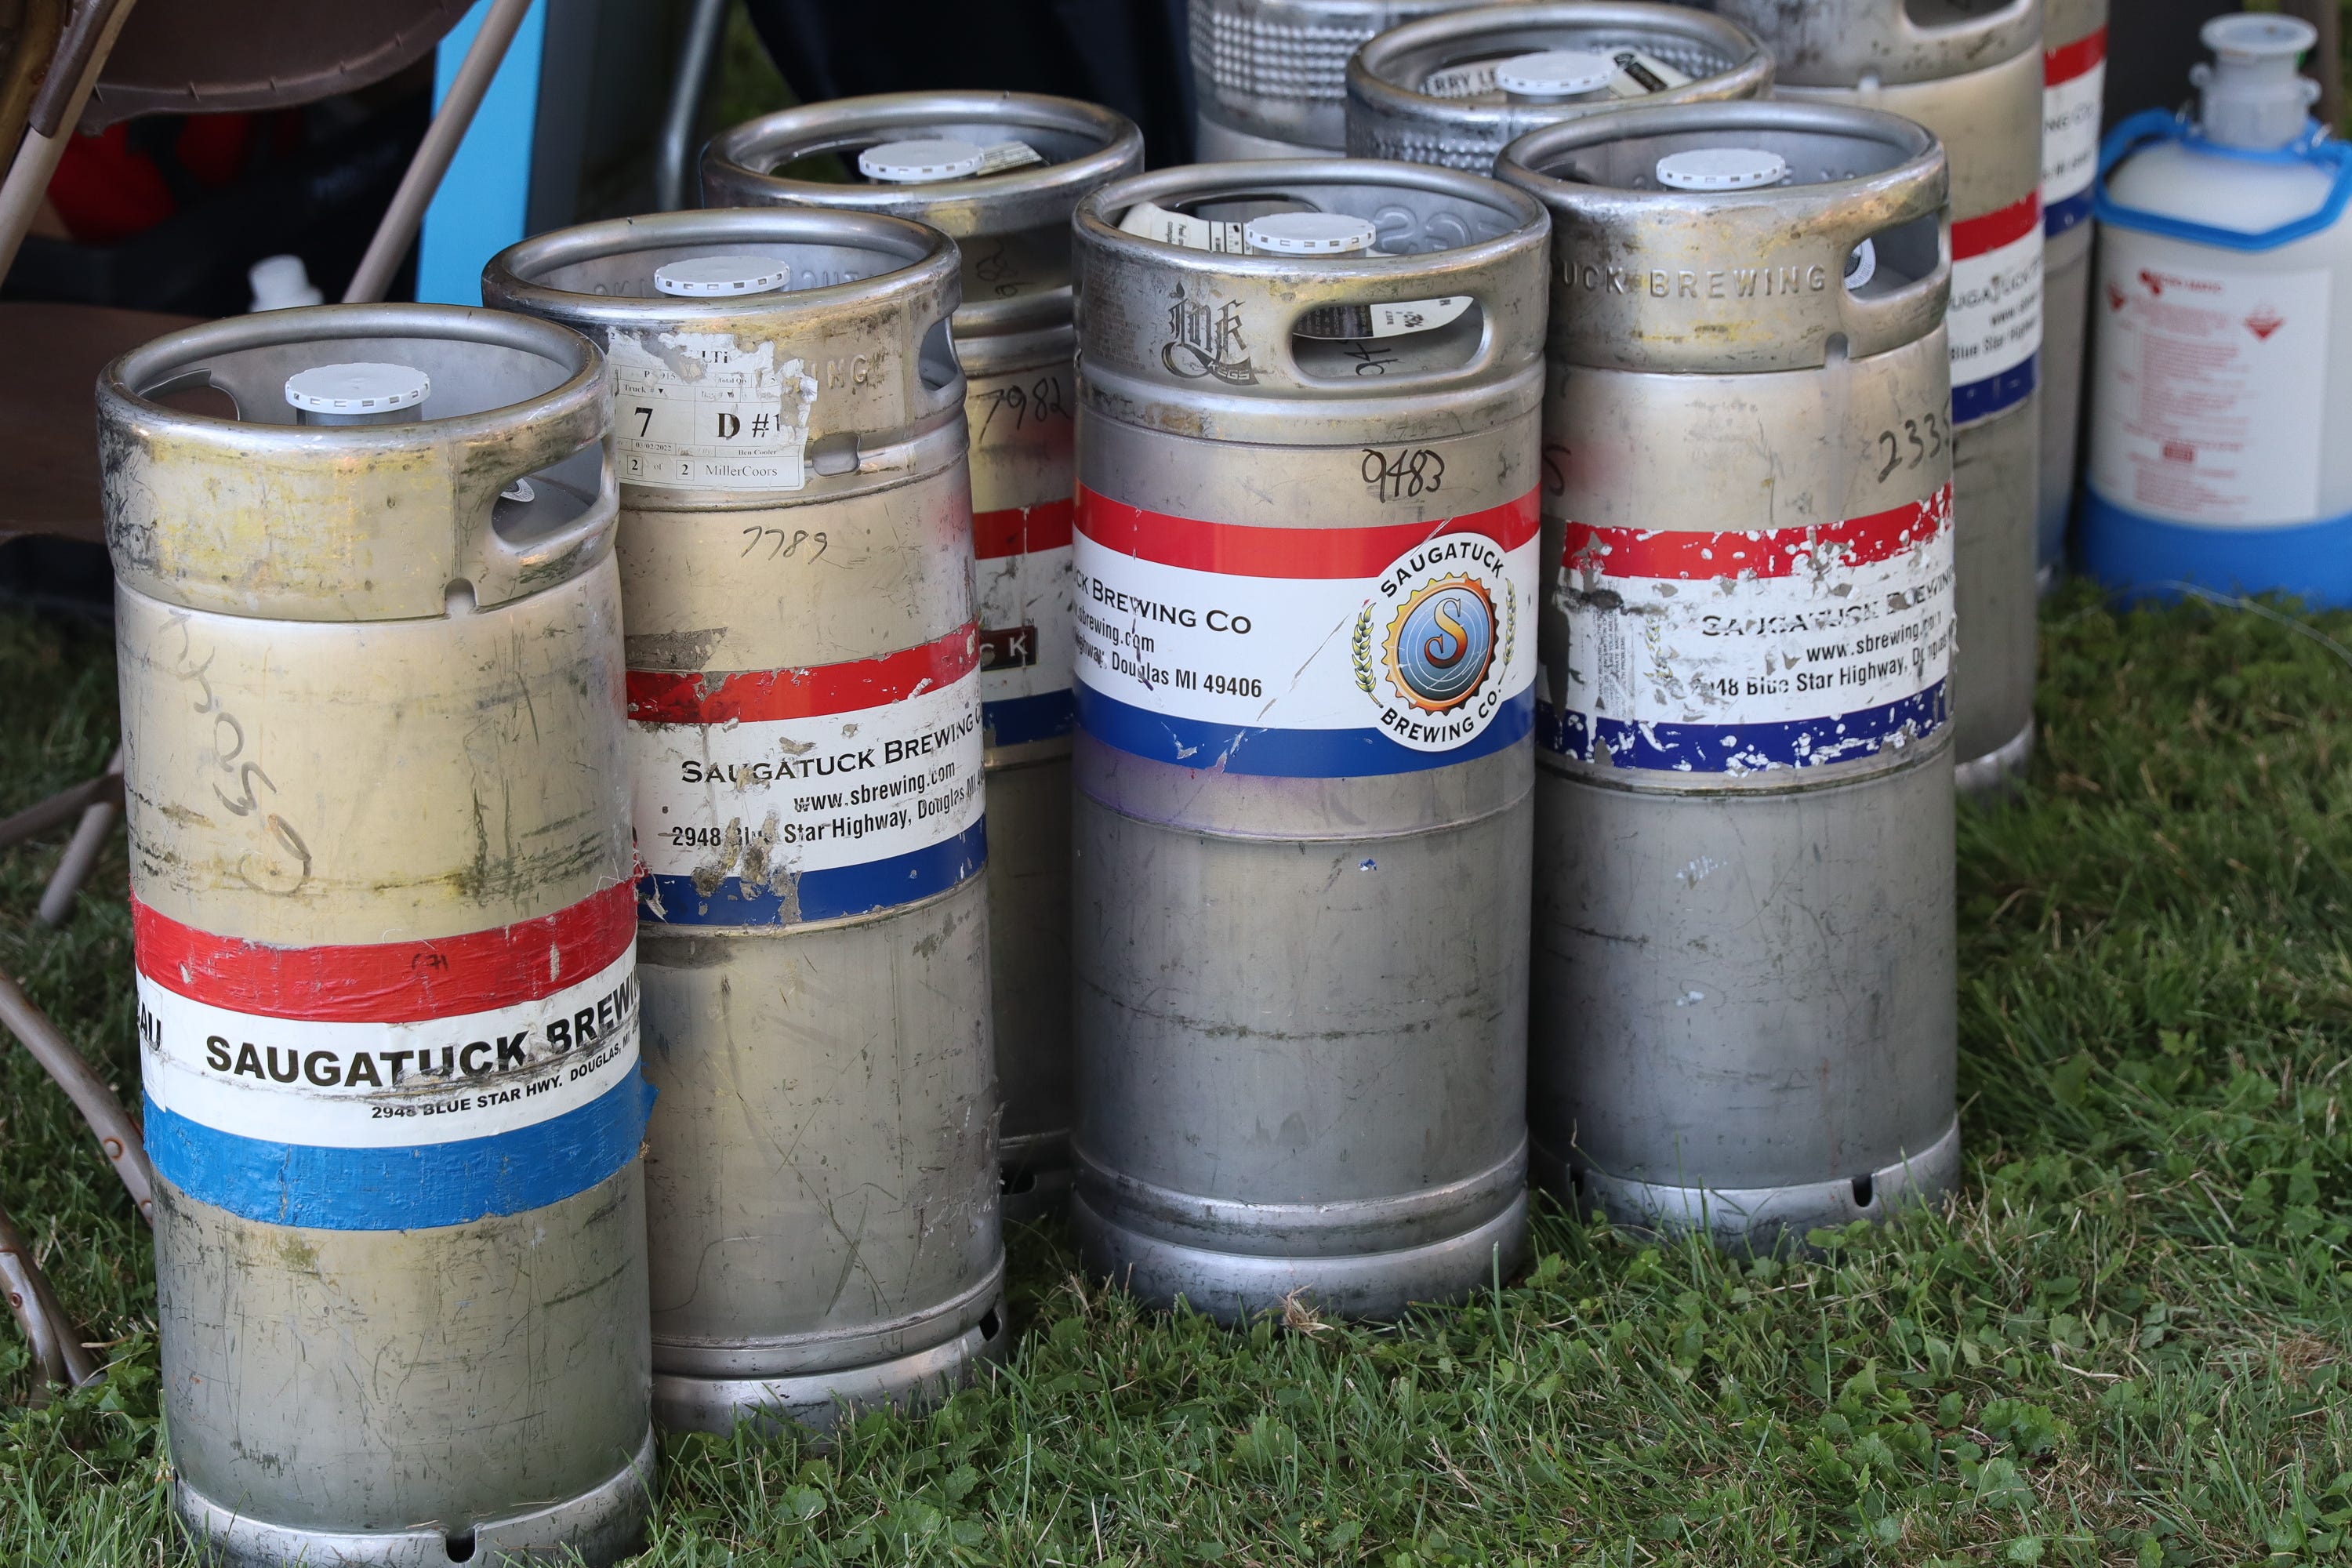 The good stuff. A series of Saugatuck Brewing Co. kegs await tapping at the Michigan Brewers Guild Summer Beer Festival in Ypsilanti's Riverside Park Friday.